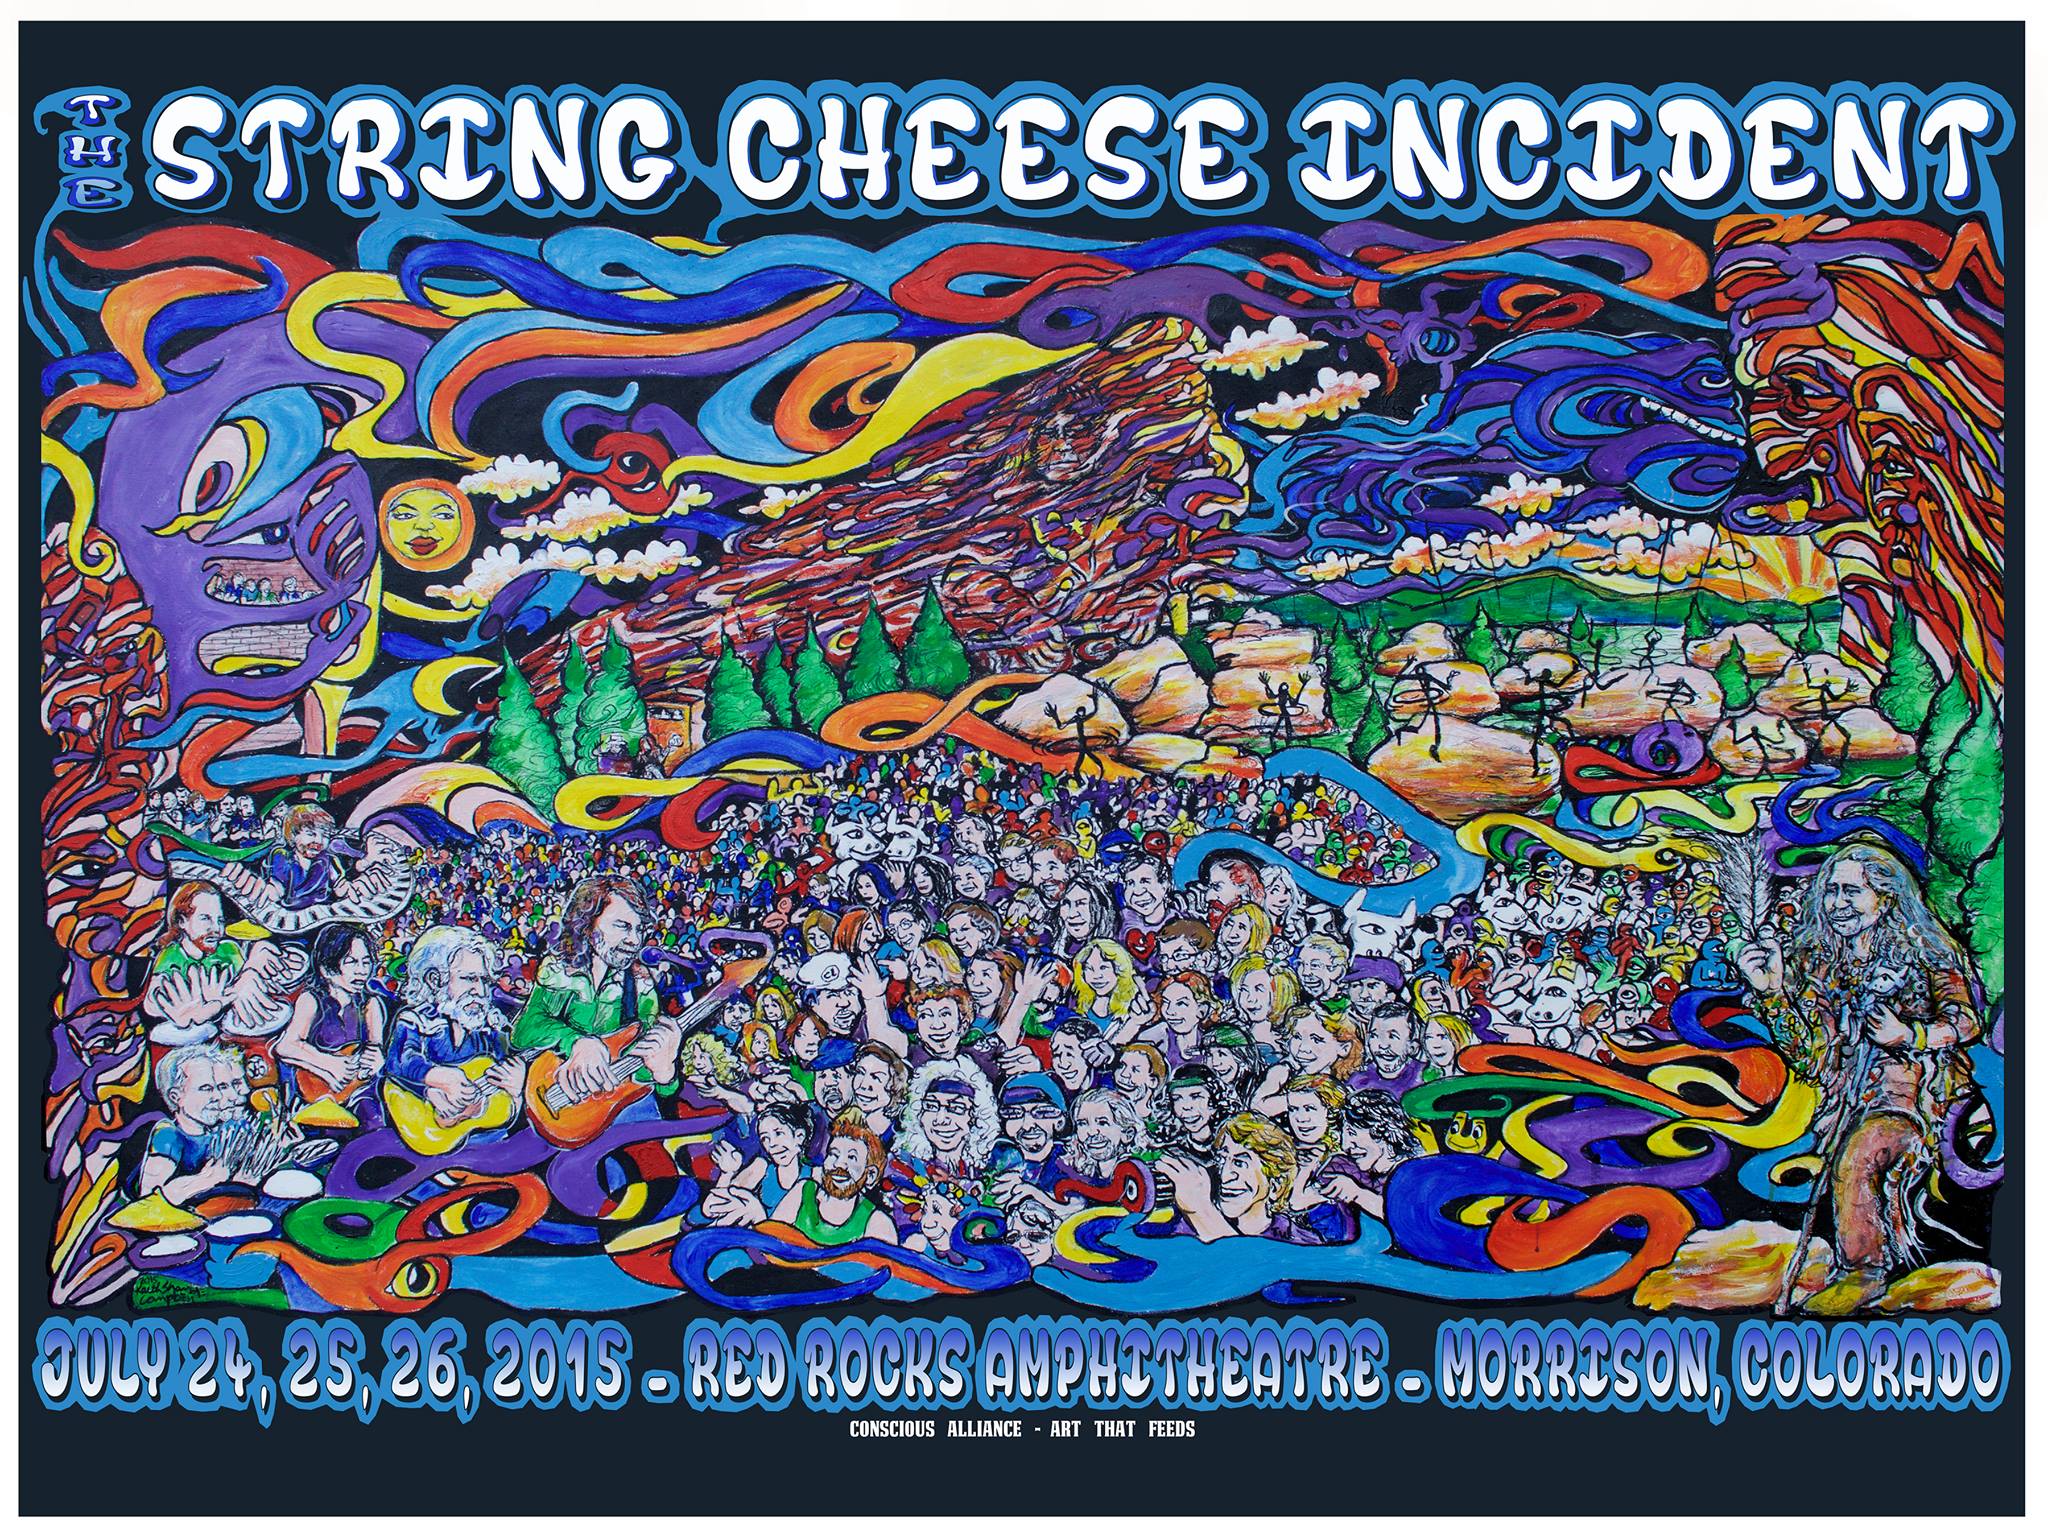 2015 Red Rocks Conscious Alliance Art That Feeds Poster by Scramble Campbell